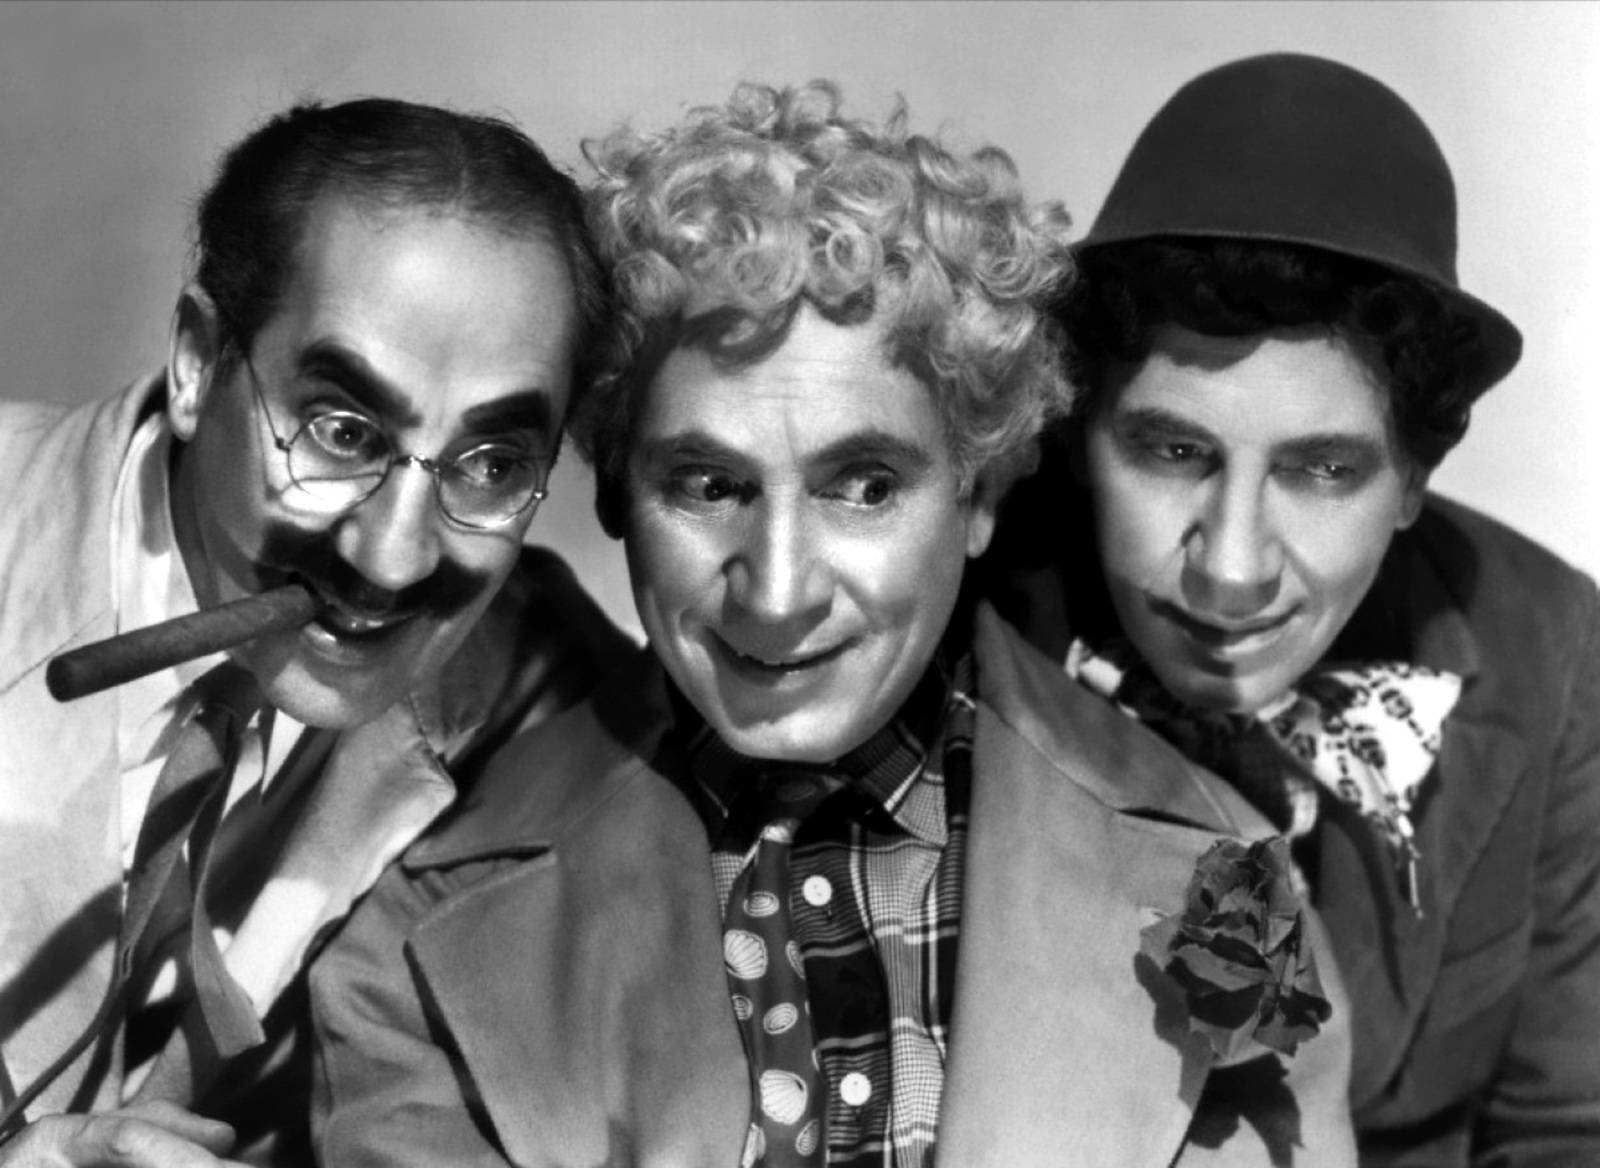 Marx Brothers Suspicious Faces Background